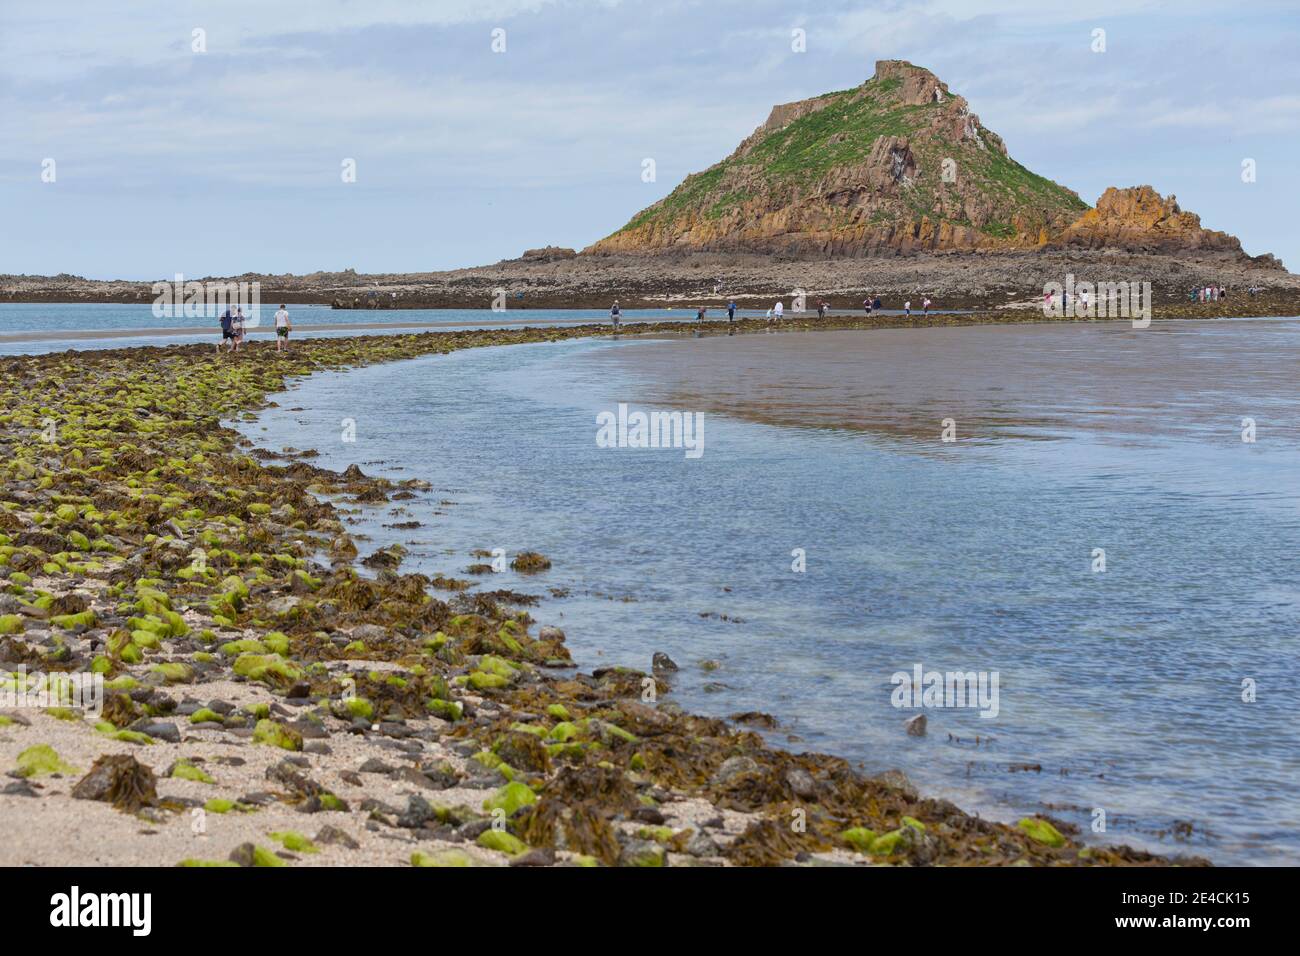 The tidal island Ilot Verdelet is a bird breeding area and popular for Peche á pied - fishing on foot, which is only possible there when the tide is high and the tide is low. Val Andre, Brittany, France Stock Photo